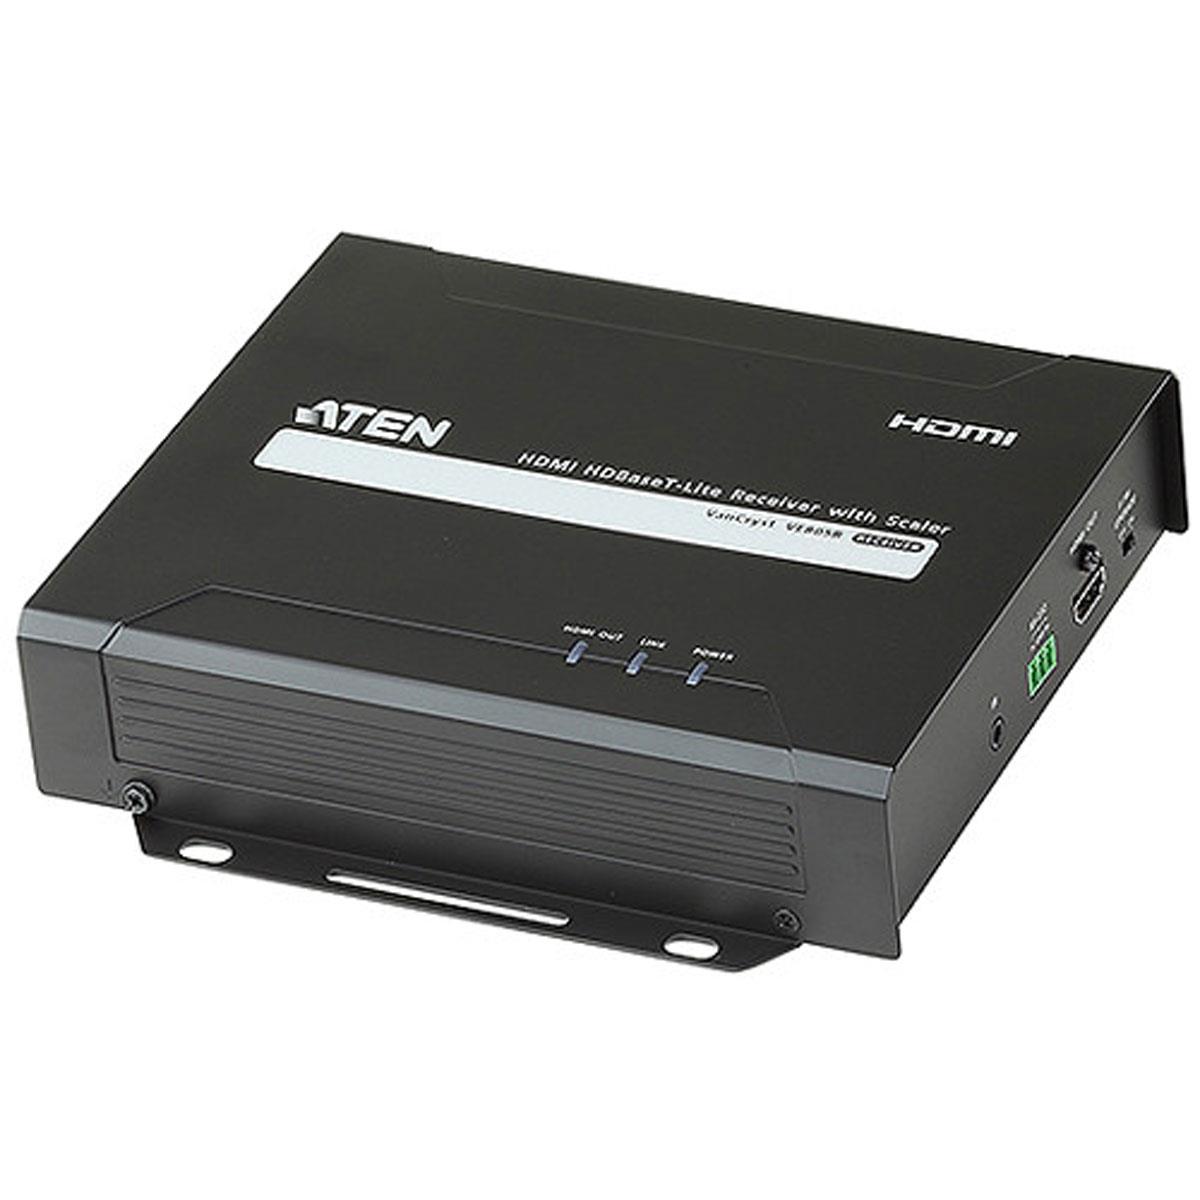 

Aten VE805R HDMI HDBaseT-Lite Receiver with Scaler